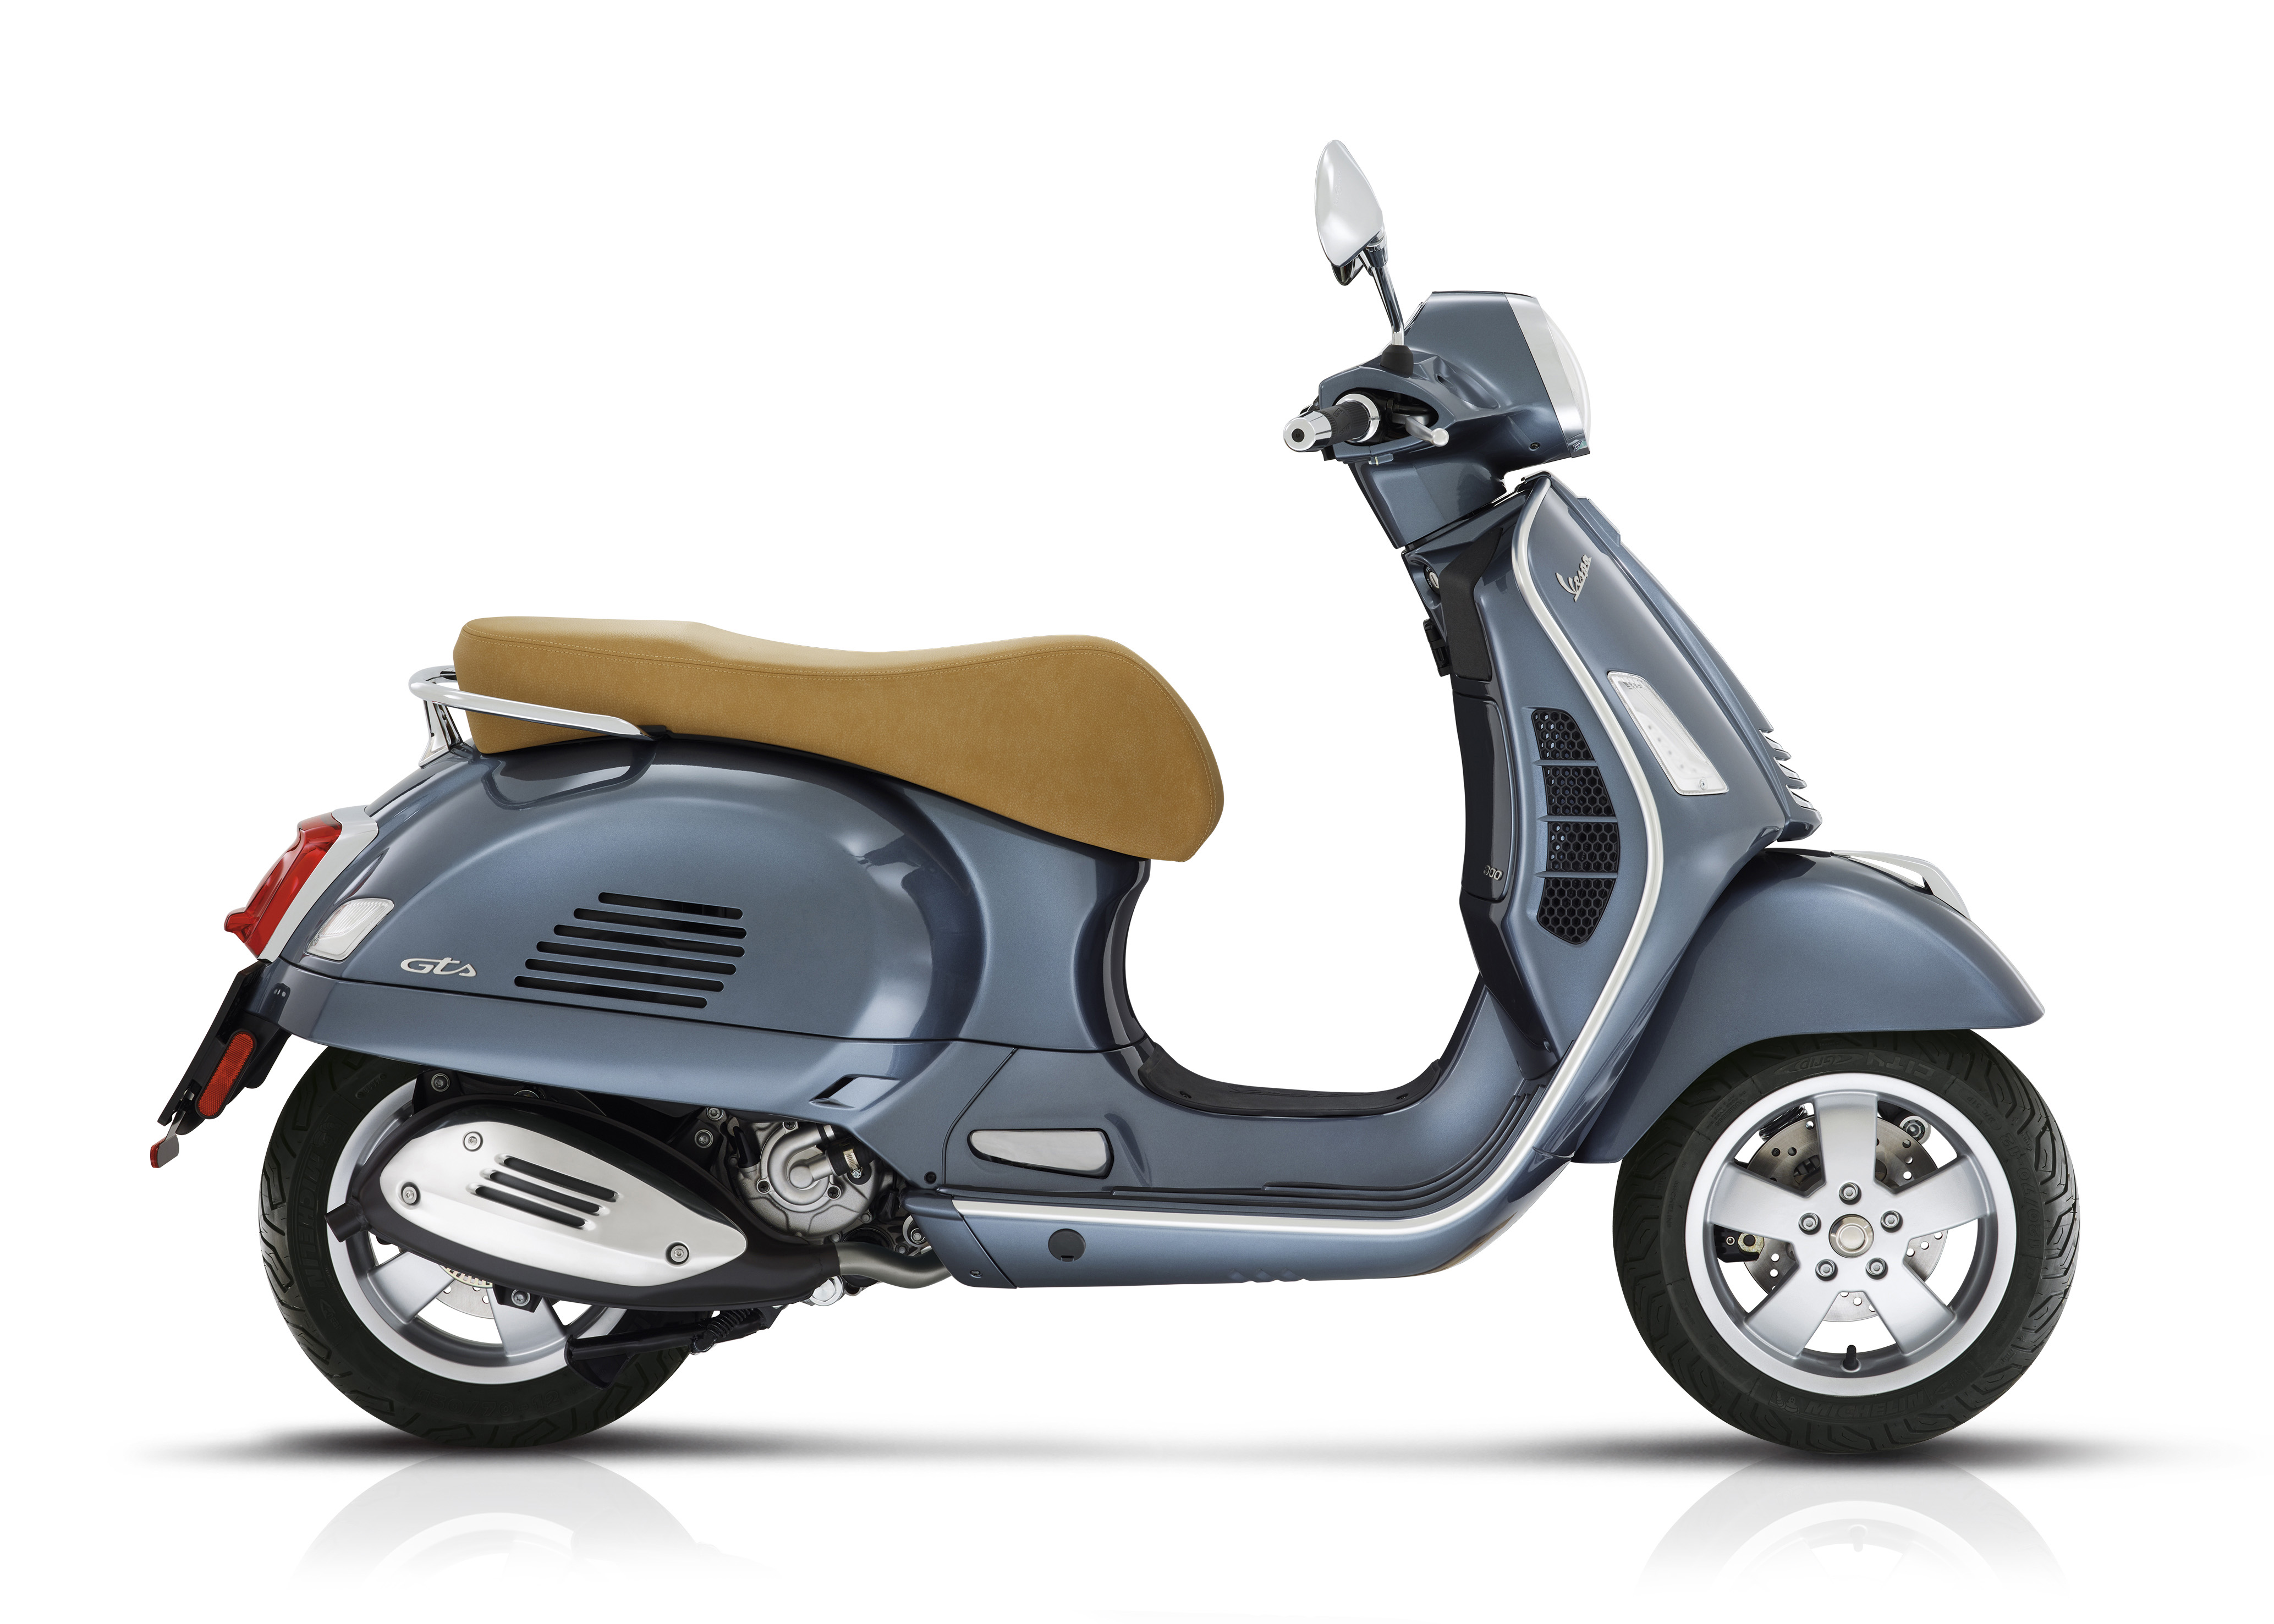 2020 Vespa GTS 300 Buyer's Guide: Specs, Photos, Price Cycle World